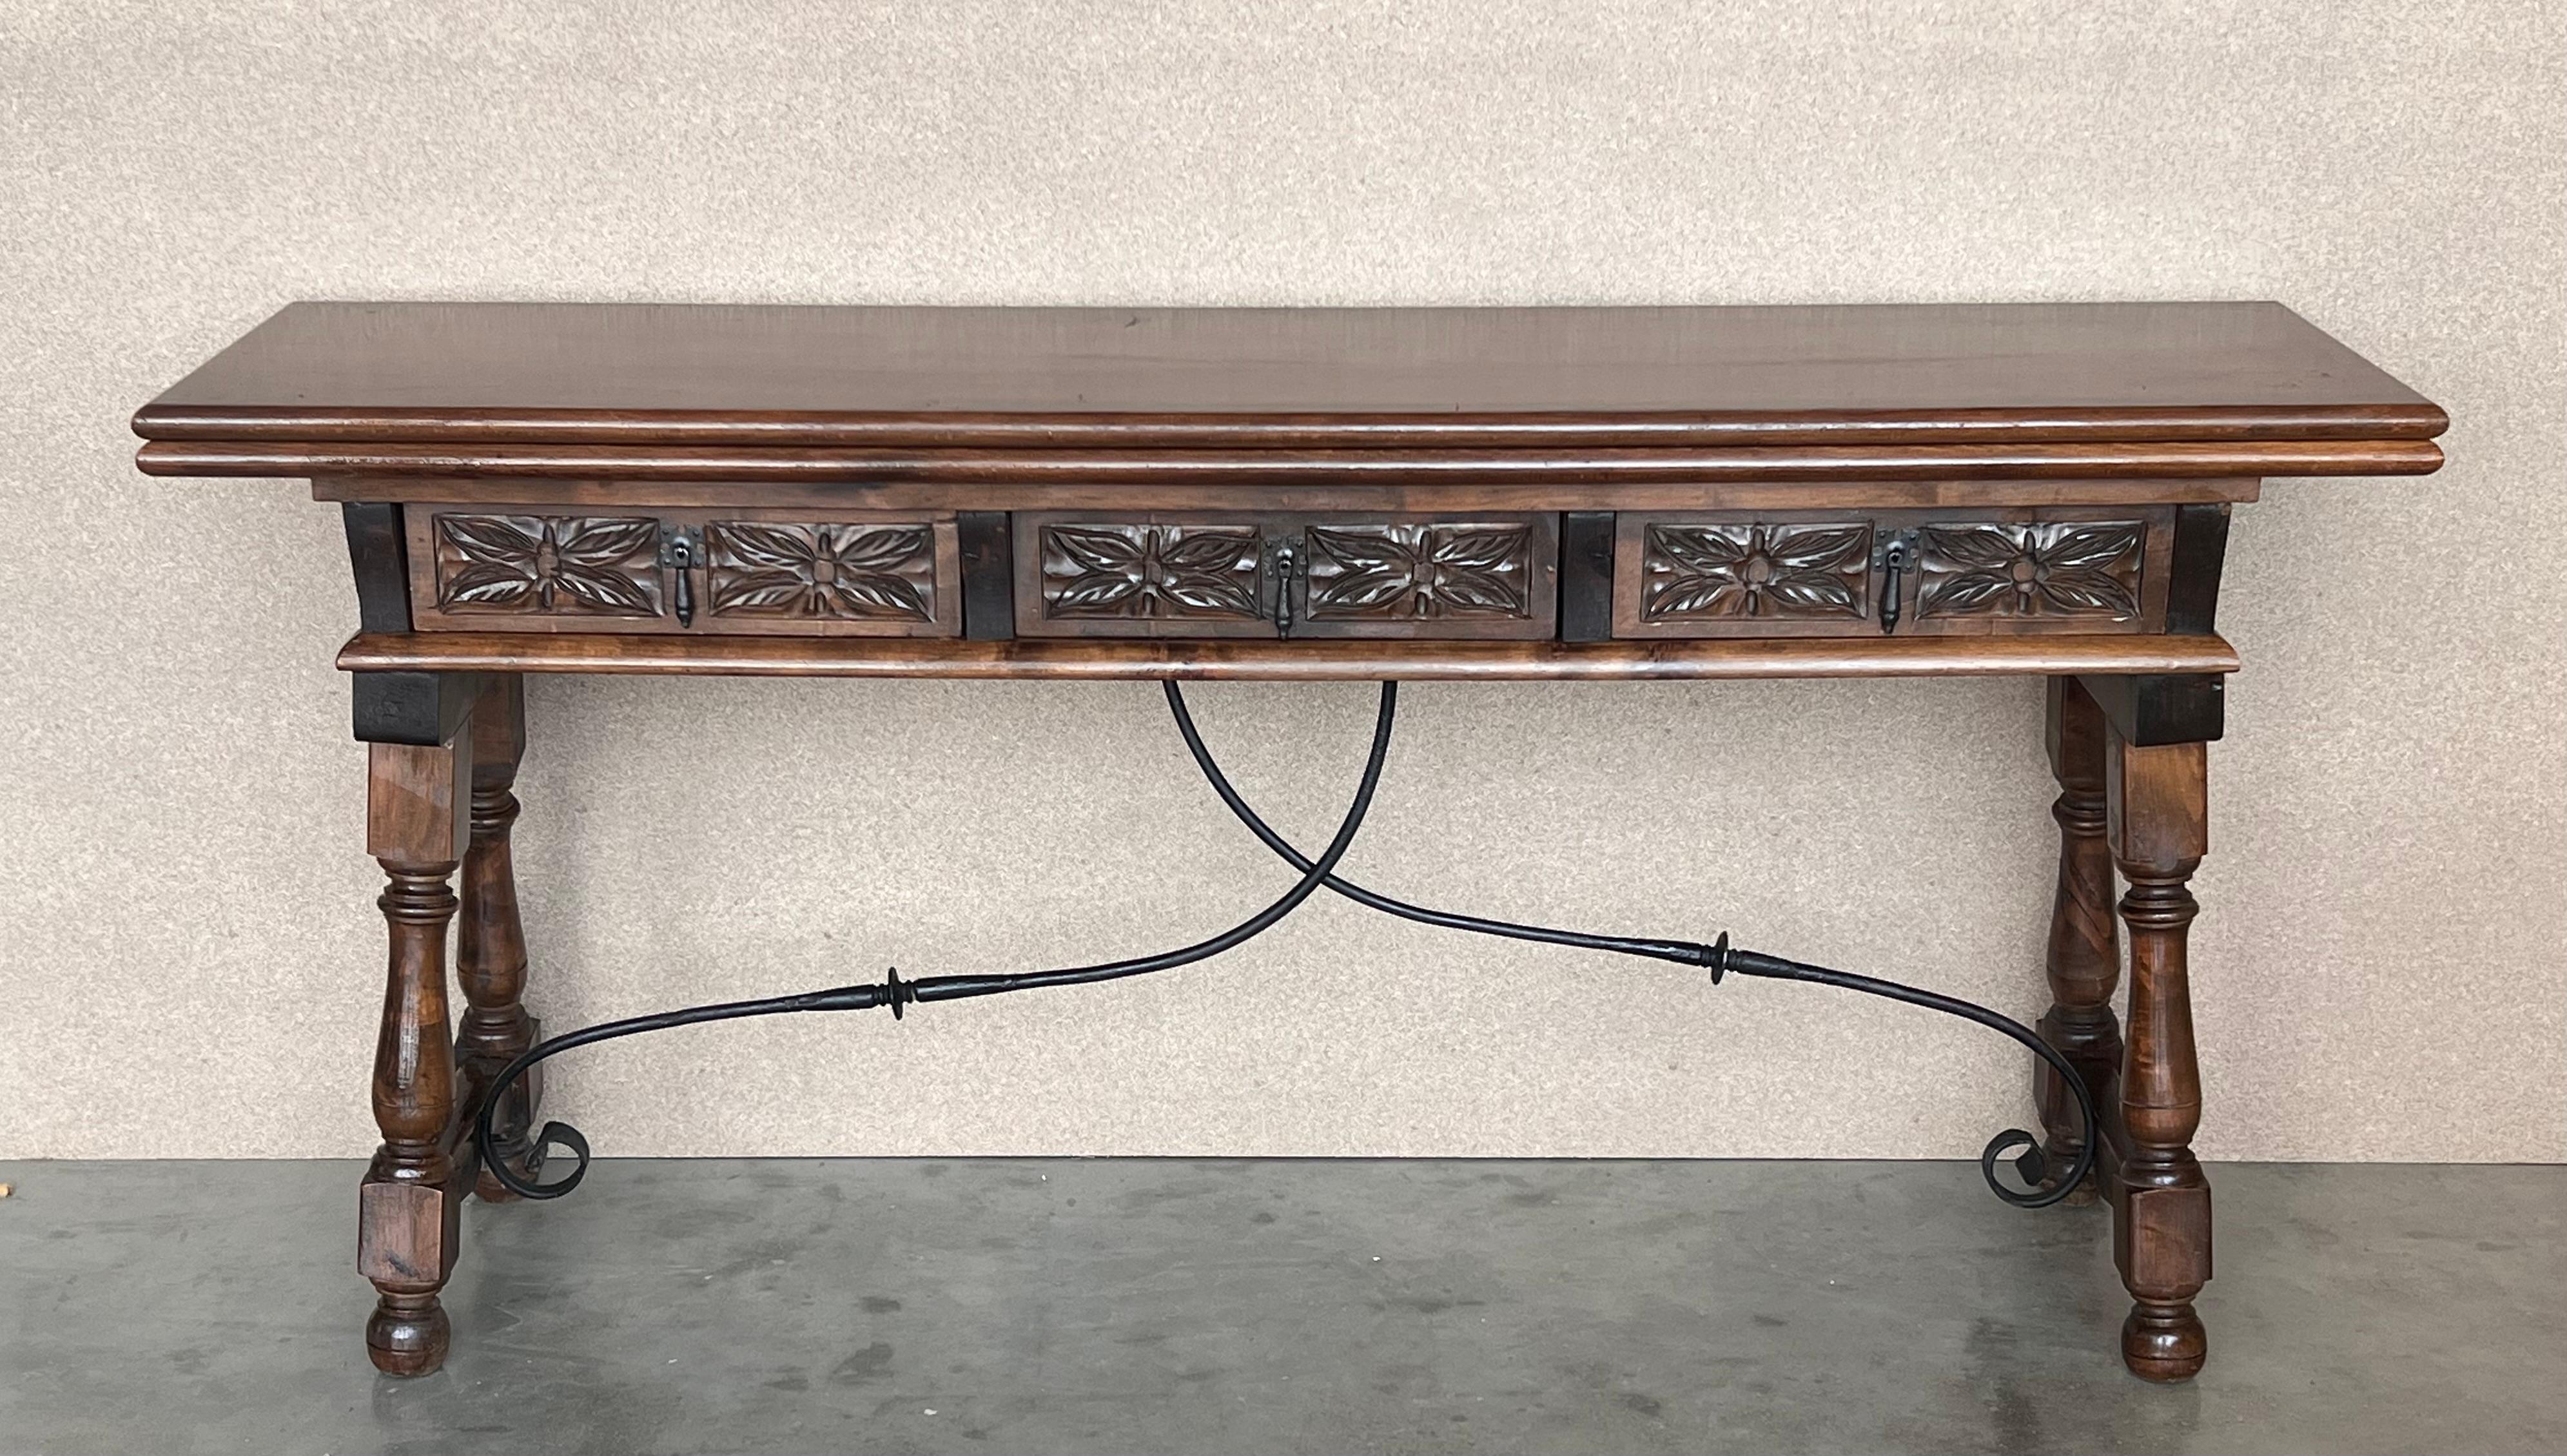 Baroque Early 20th Century Spanish Fold Out Console Table with Iron Stretcher & 3 Drawer